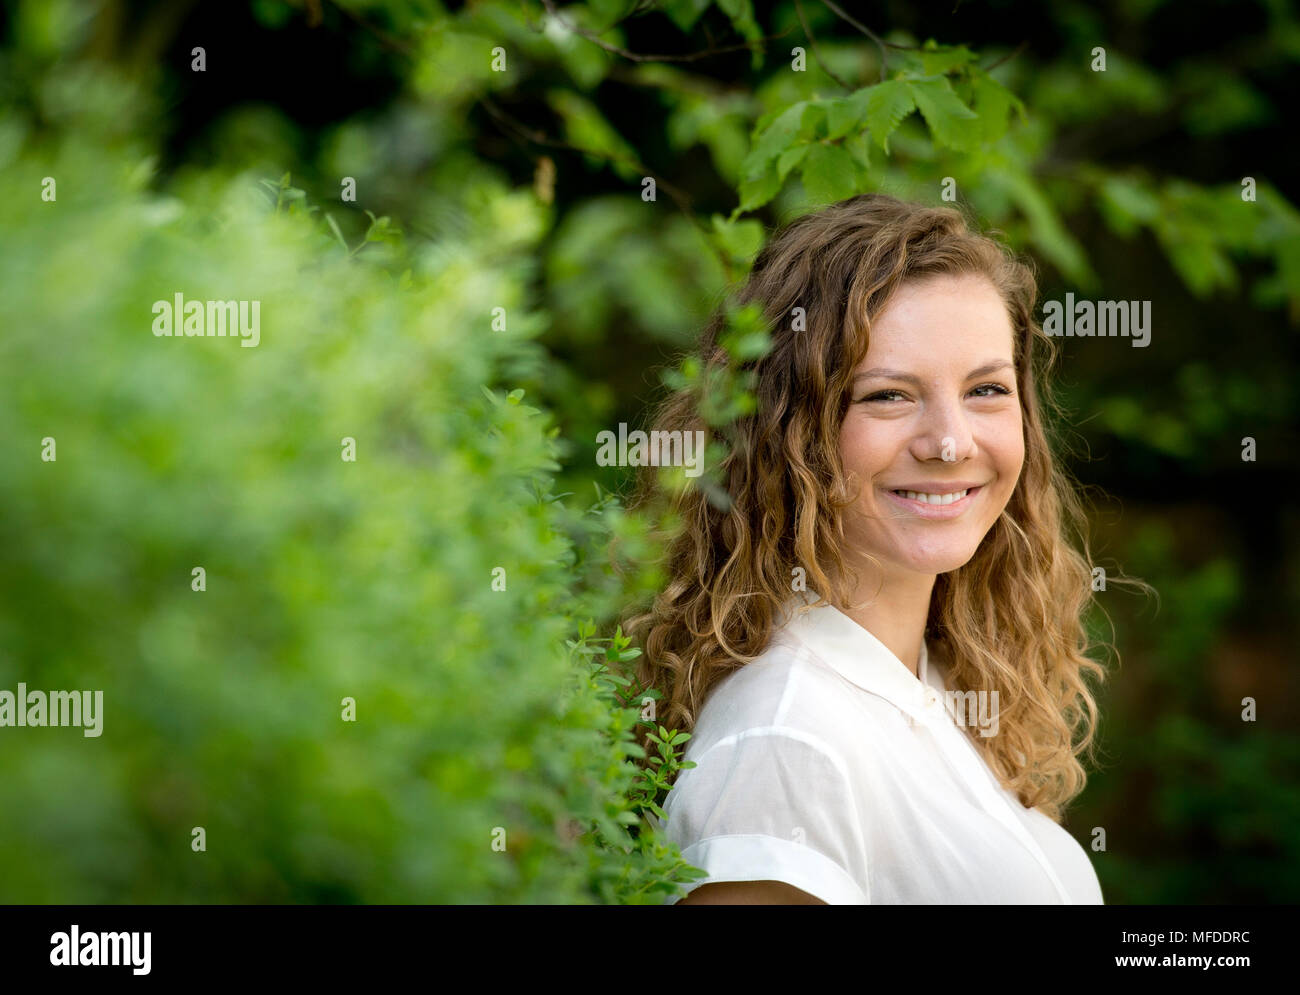 Lenka High Resolution Stock Photography and Images - Alamy